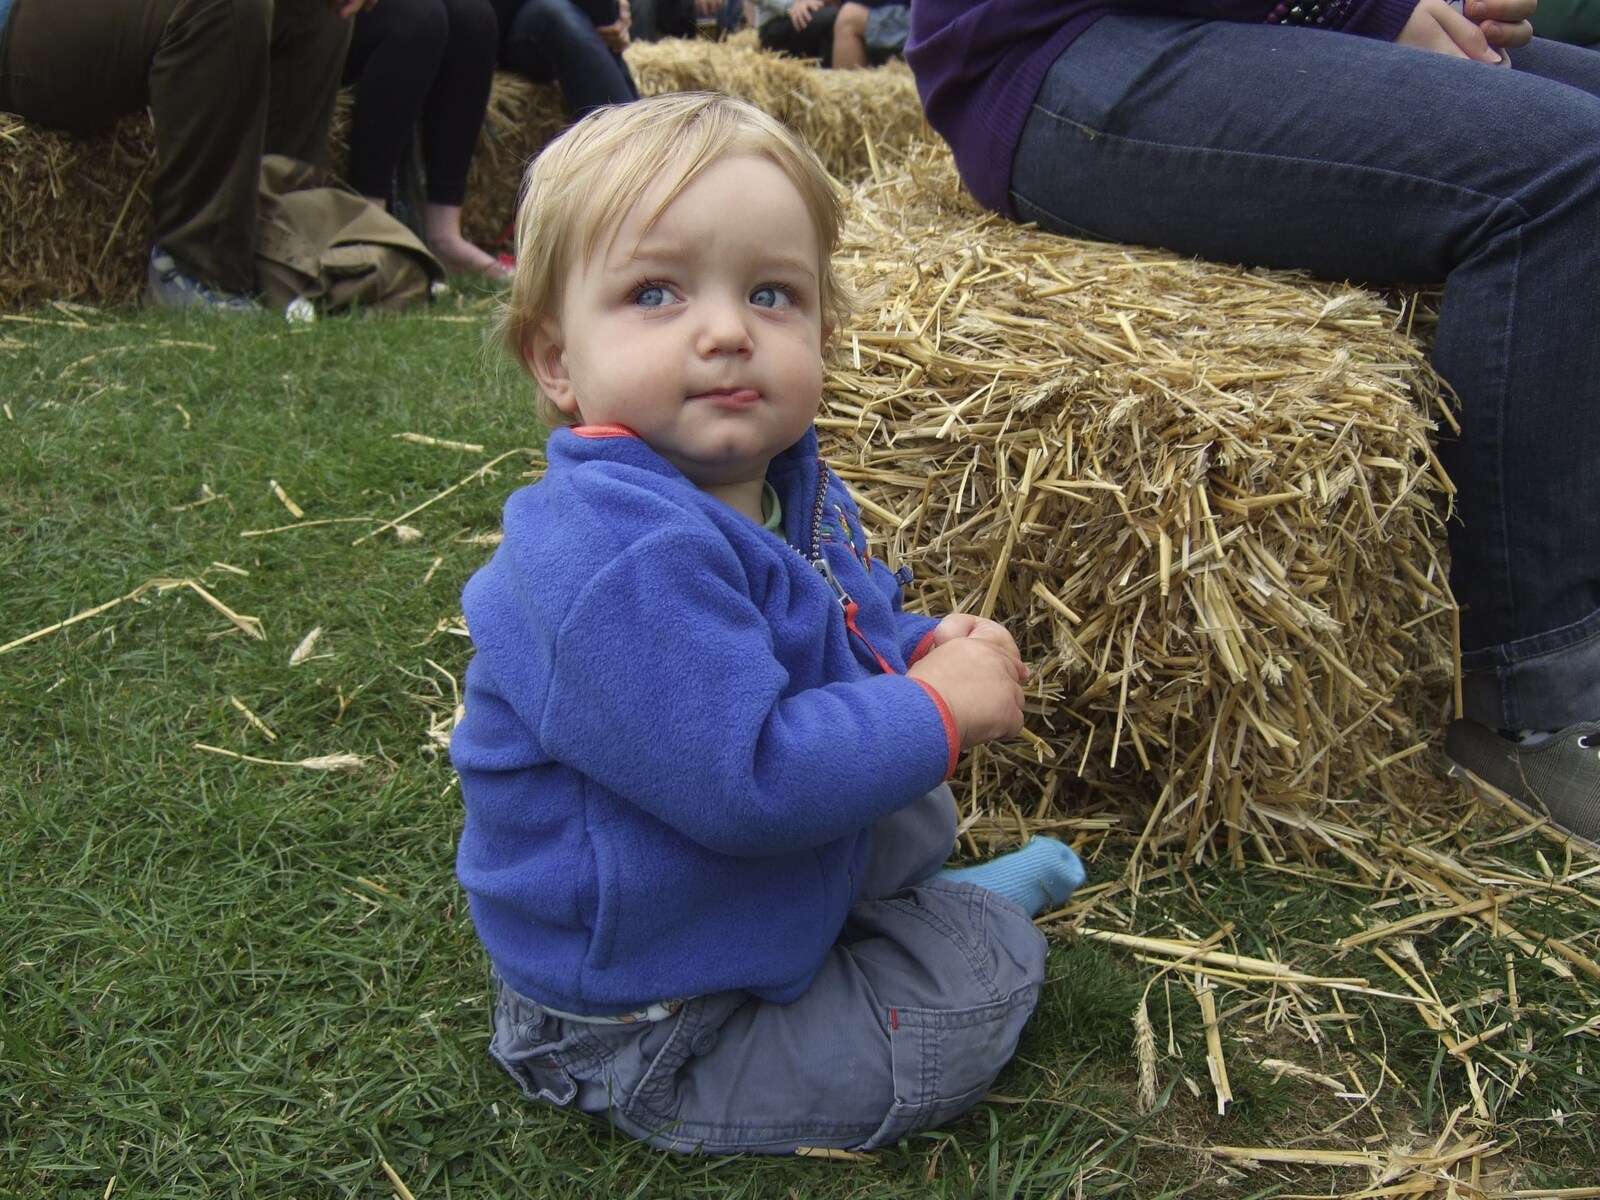 Hanging out by a straw bale from Harvest Festival at Jimmy's Farm, Wherstead, Suffolk - 12th September 2009